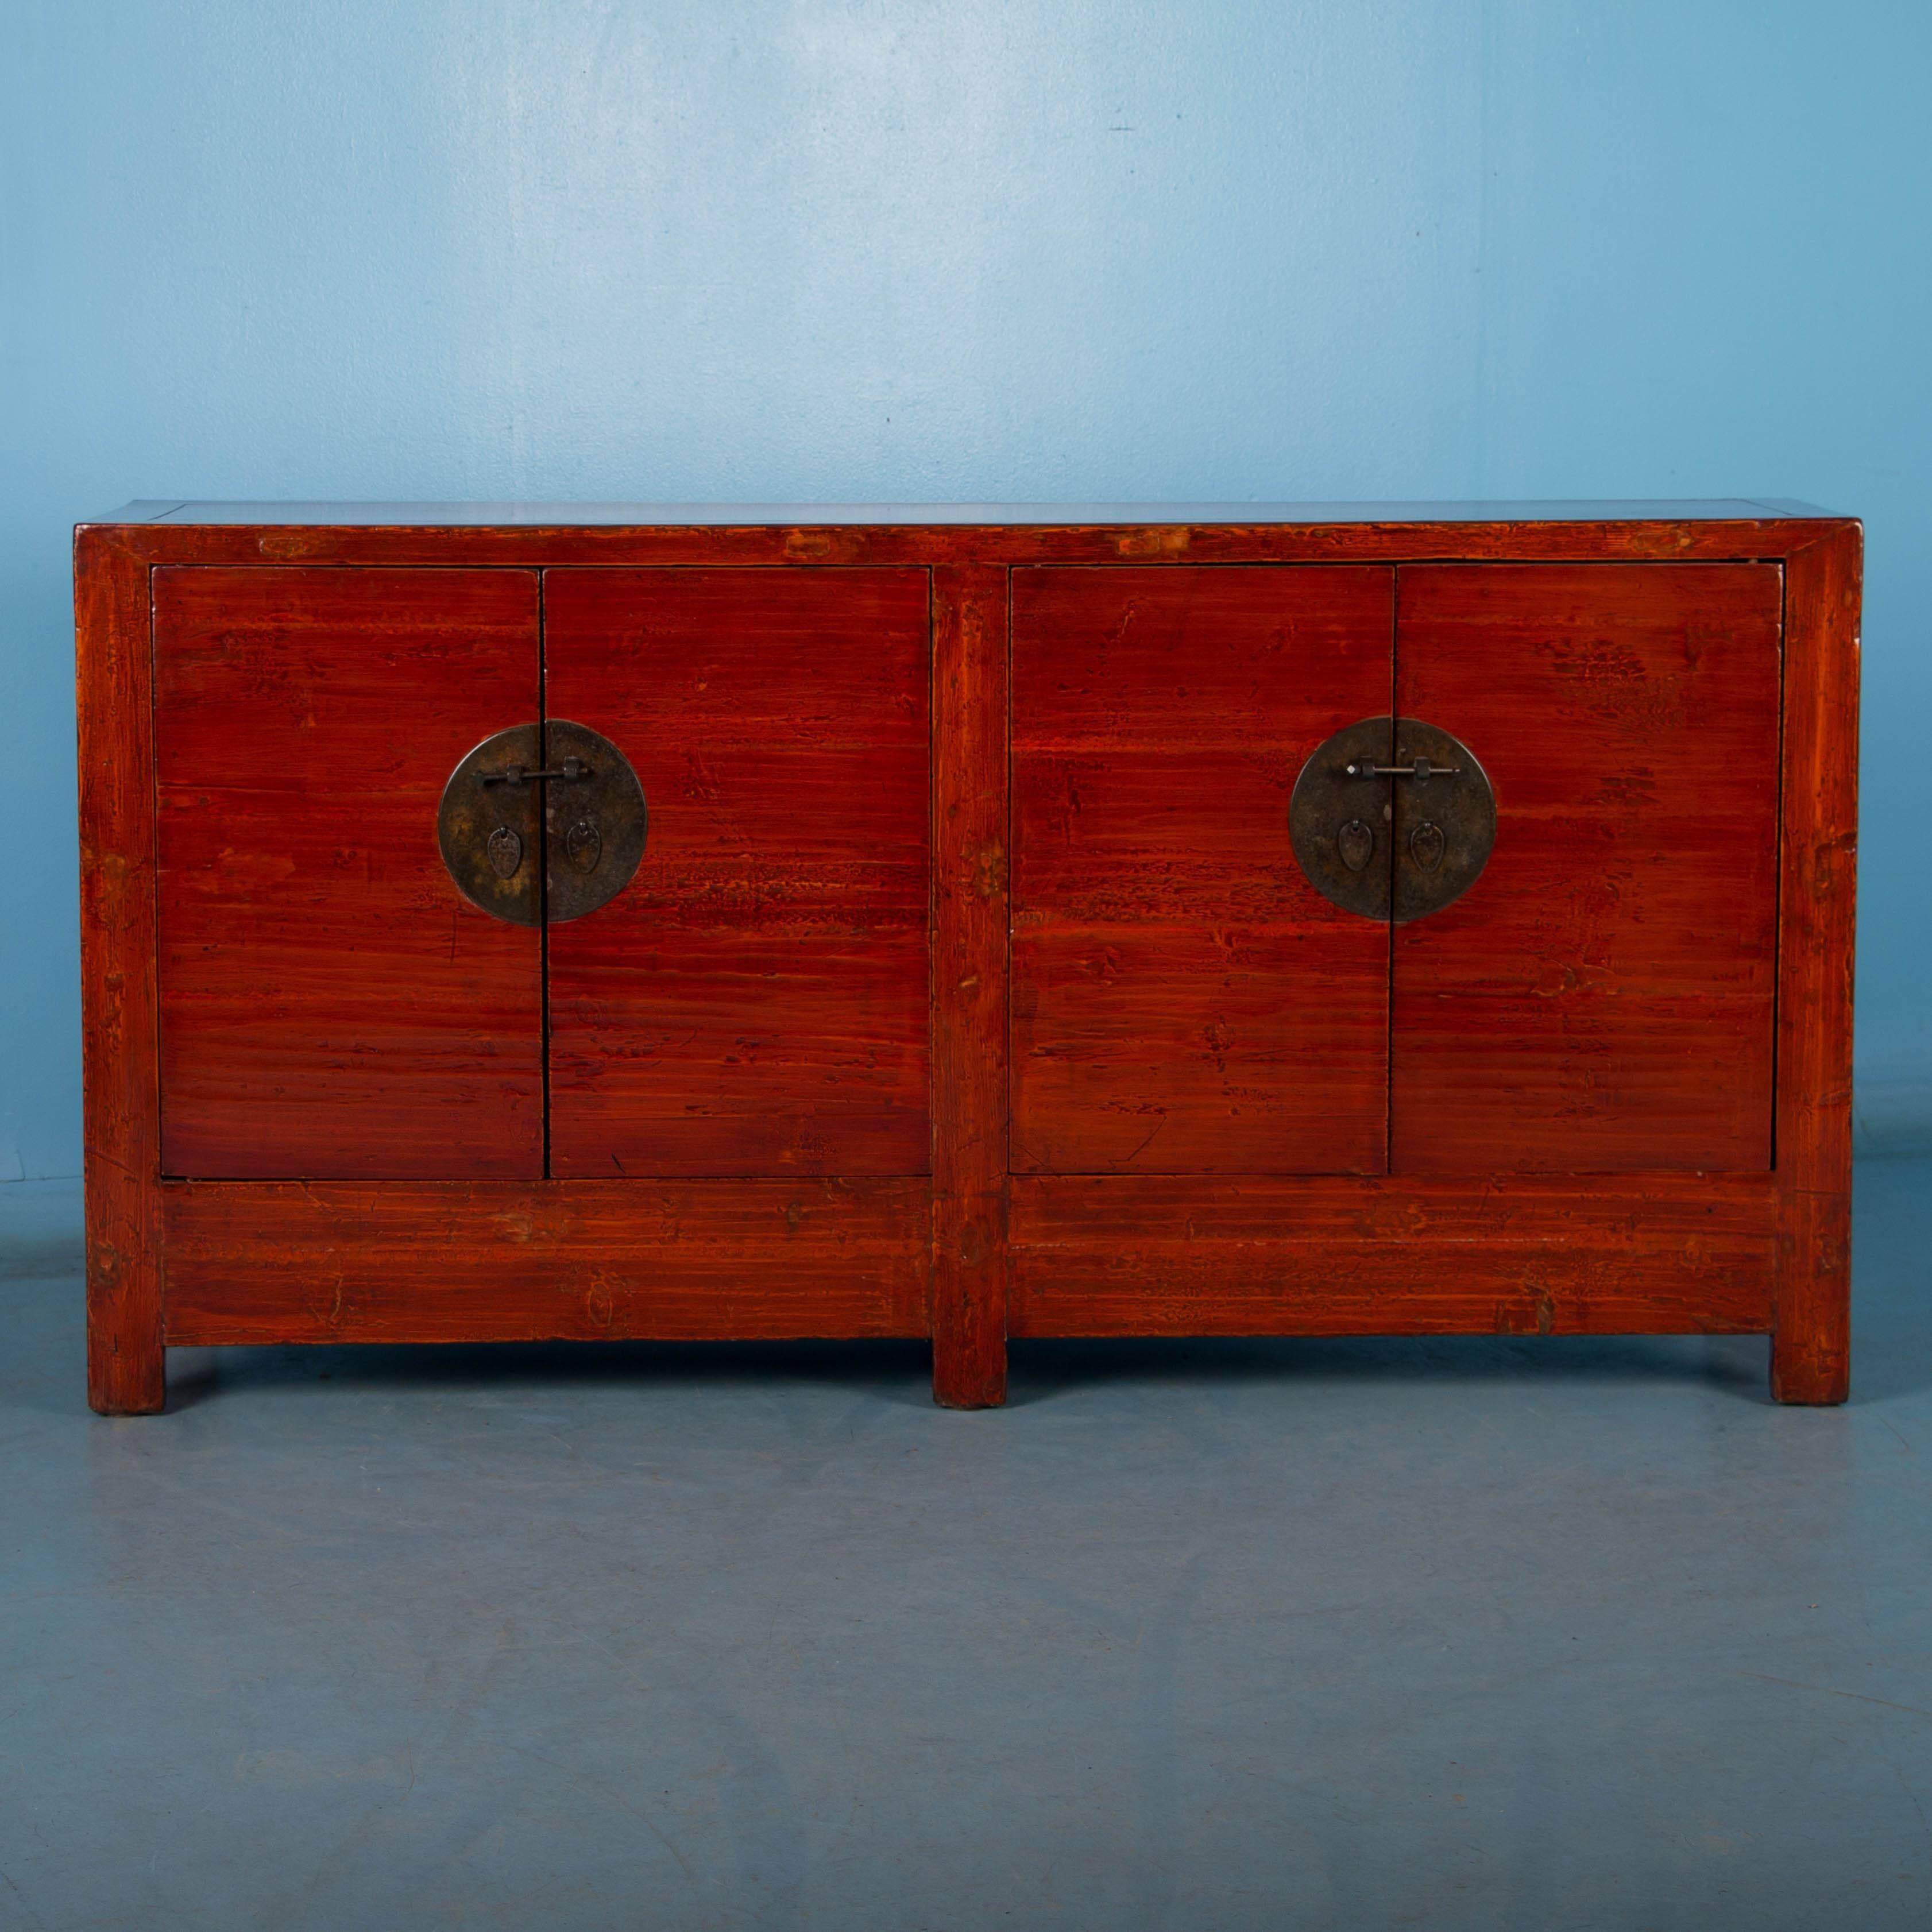 The rich red color of this pine four-door cabinet absolutely glows with it's highly polished lacquered finish, enhancing the old layers of paint in lighter and darker shades of red underneath. The black painted interior offers a nice contrast and